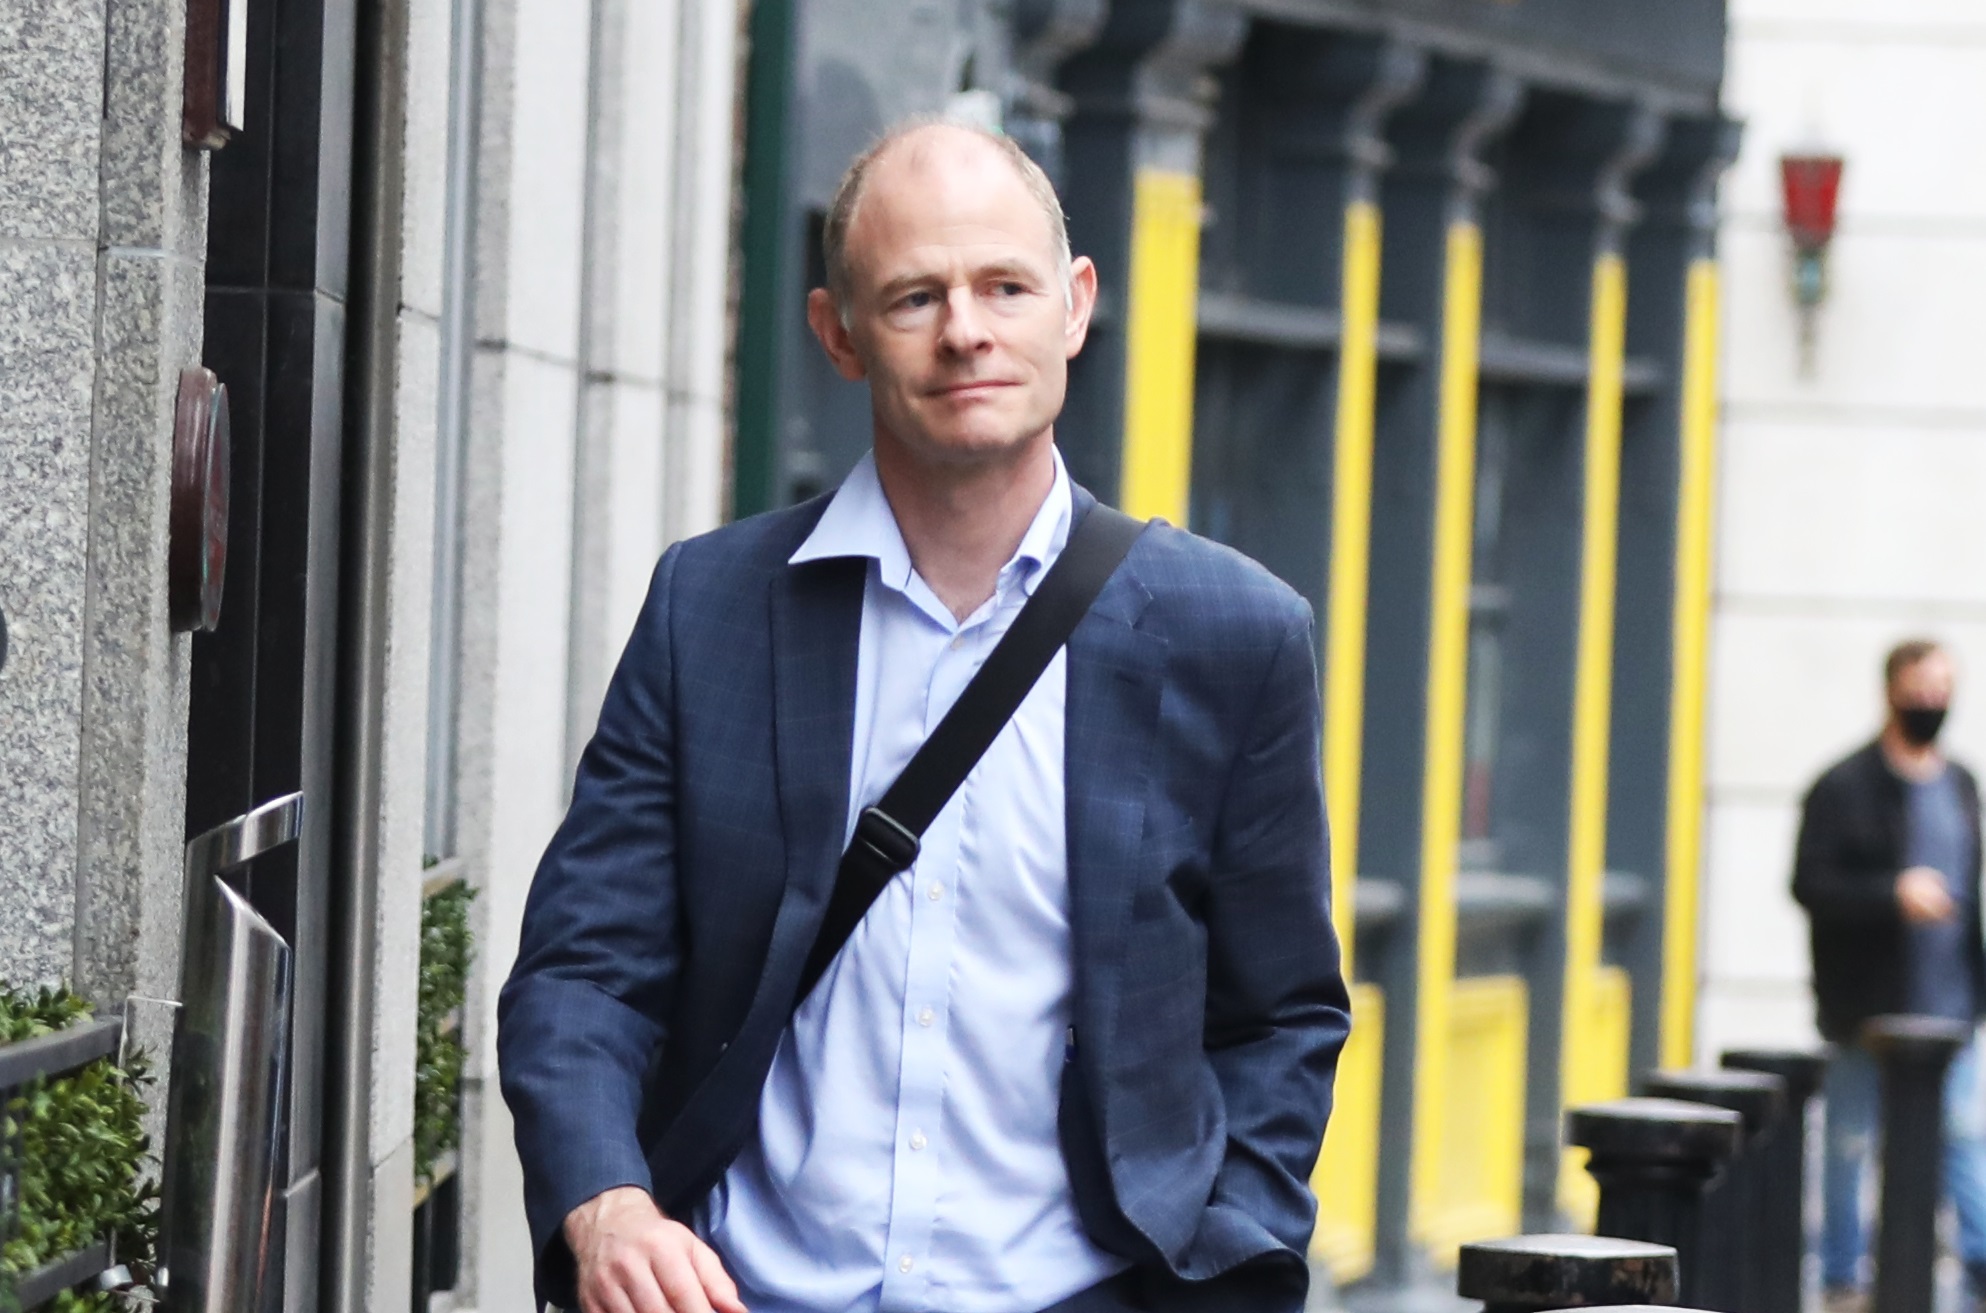 Minister of State Ossian Smyth is seen in Dublin city in June 2020